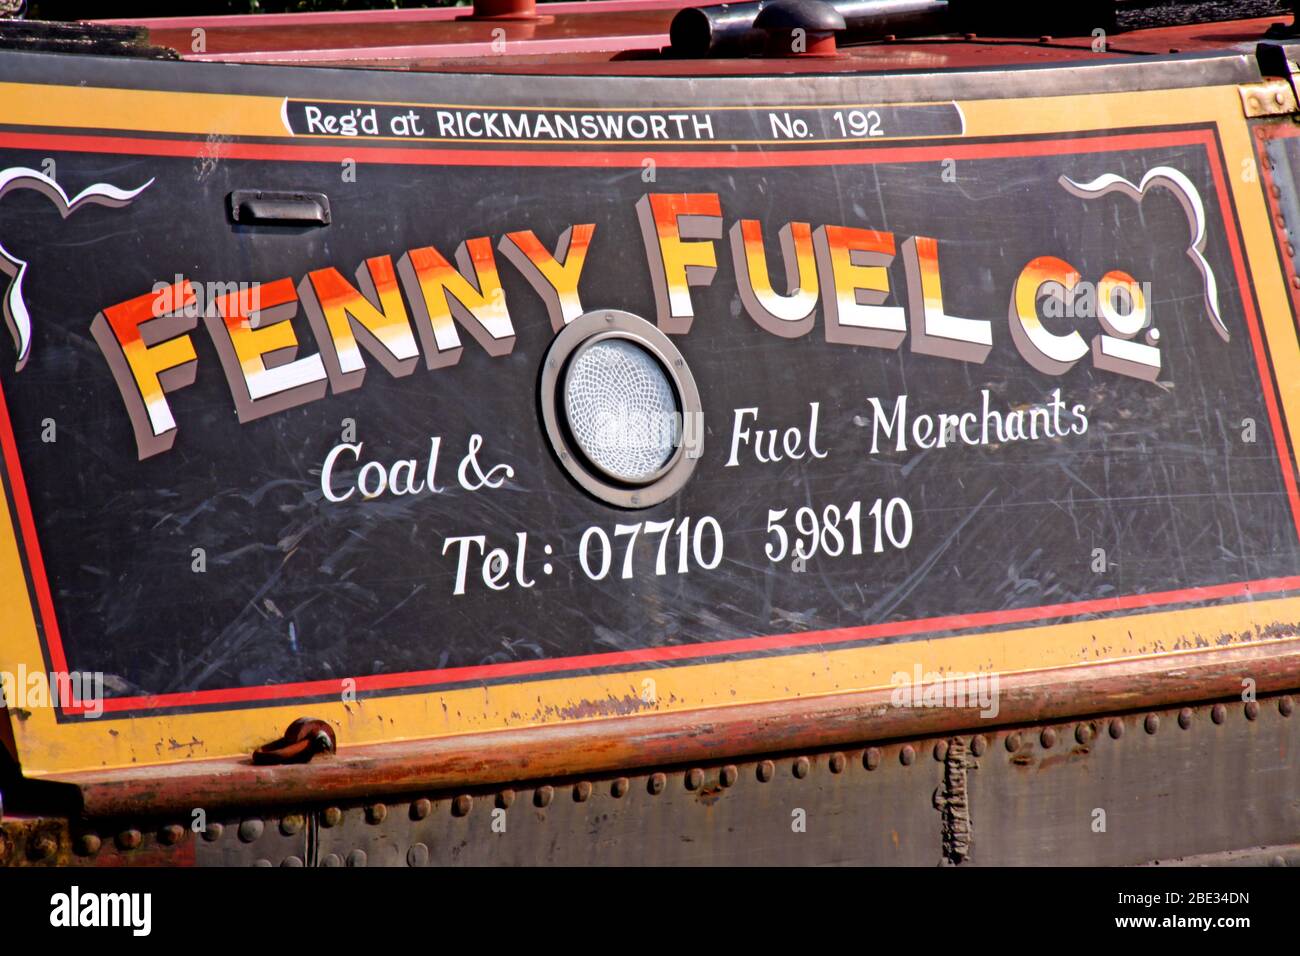 British Canal & River Trust, working canal barge boats, Northwich,Cheshire Ring - Fenny Fuel Co - Rickmansworth no 192 Stock Photo